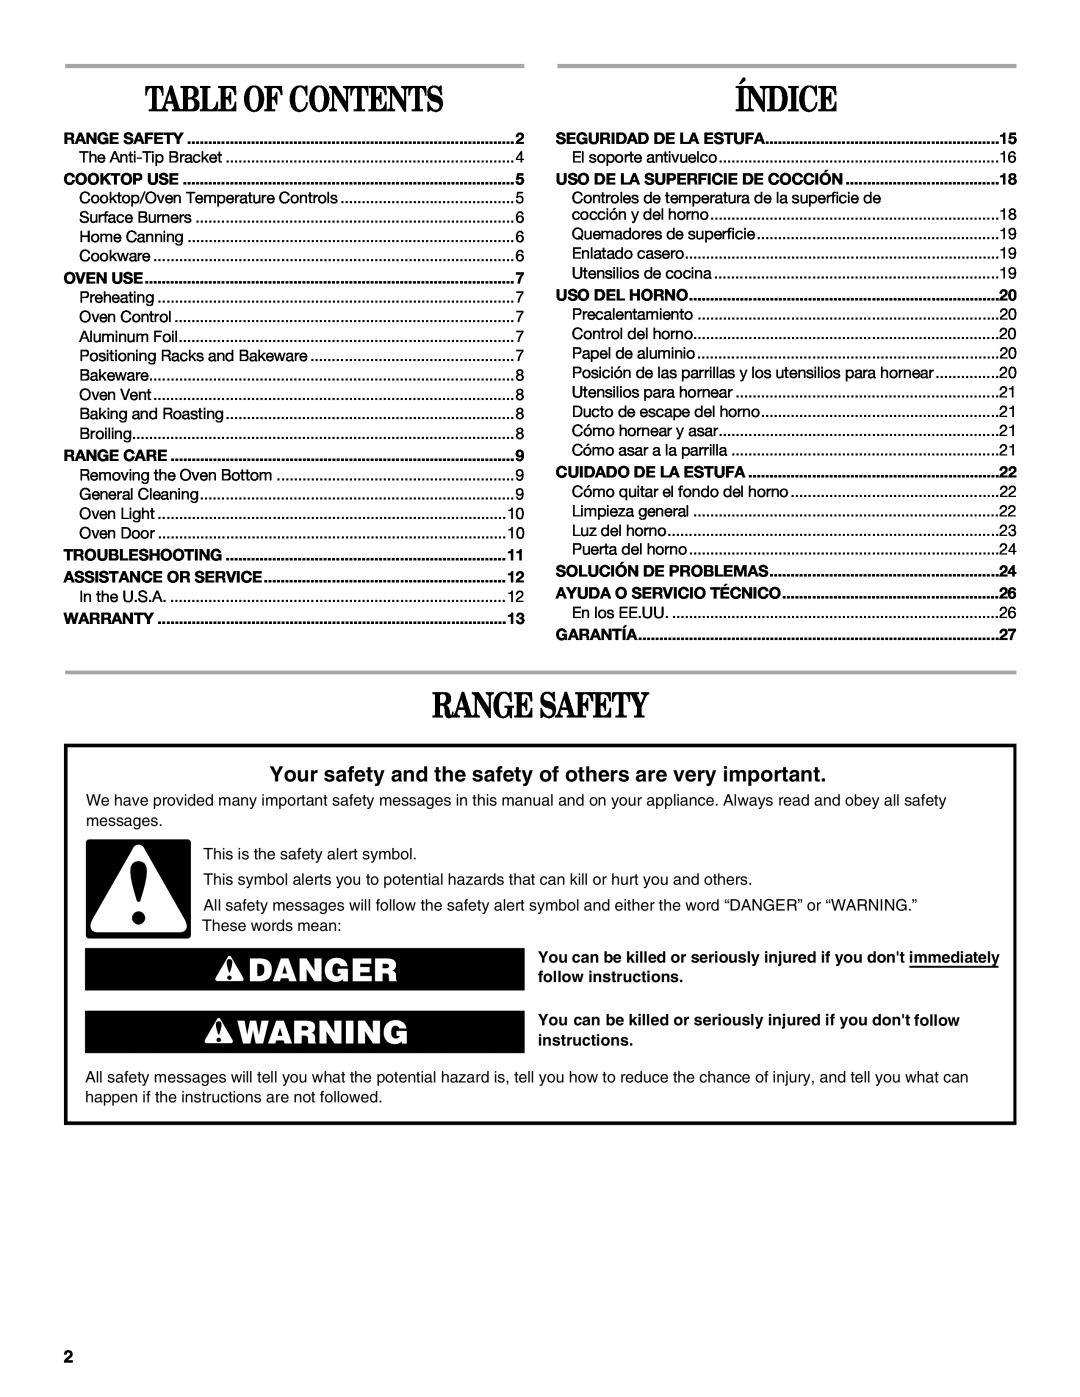 Whirlpool W10309091A manual Table Of Contents, Range Safety, Danger, Índice 